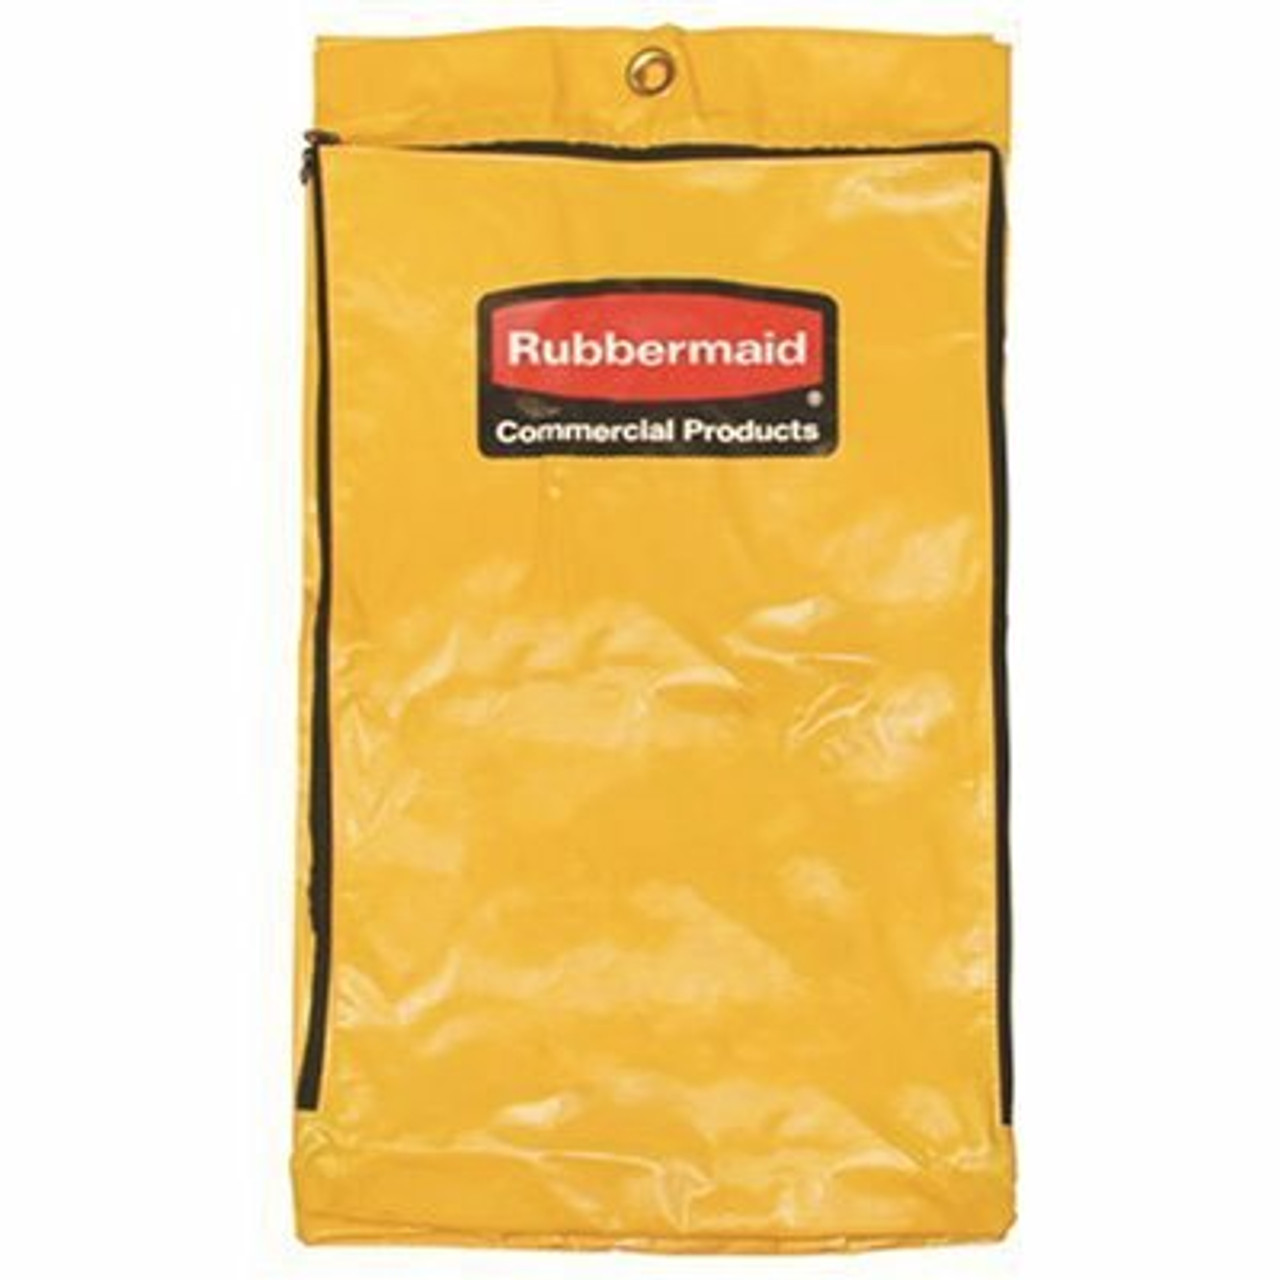 Rubbermaid Commercial Products 24 Gal. Vinyl Janitorial Cleaning Cart Bag